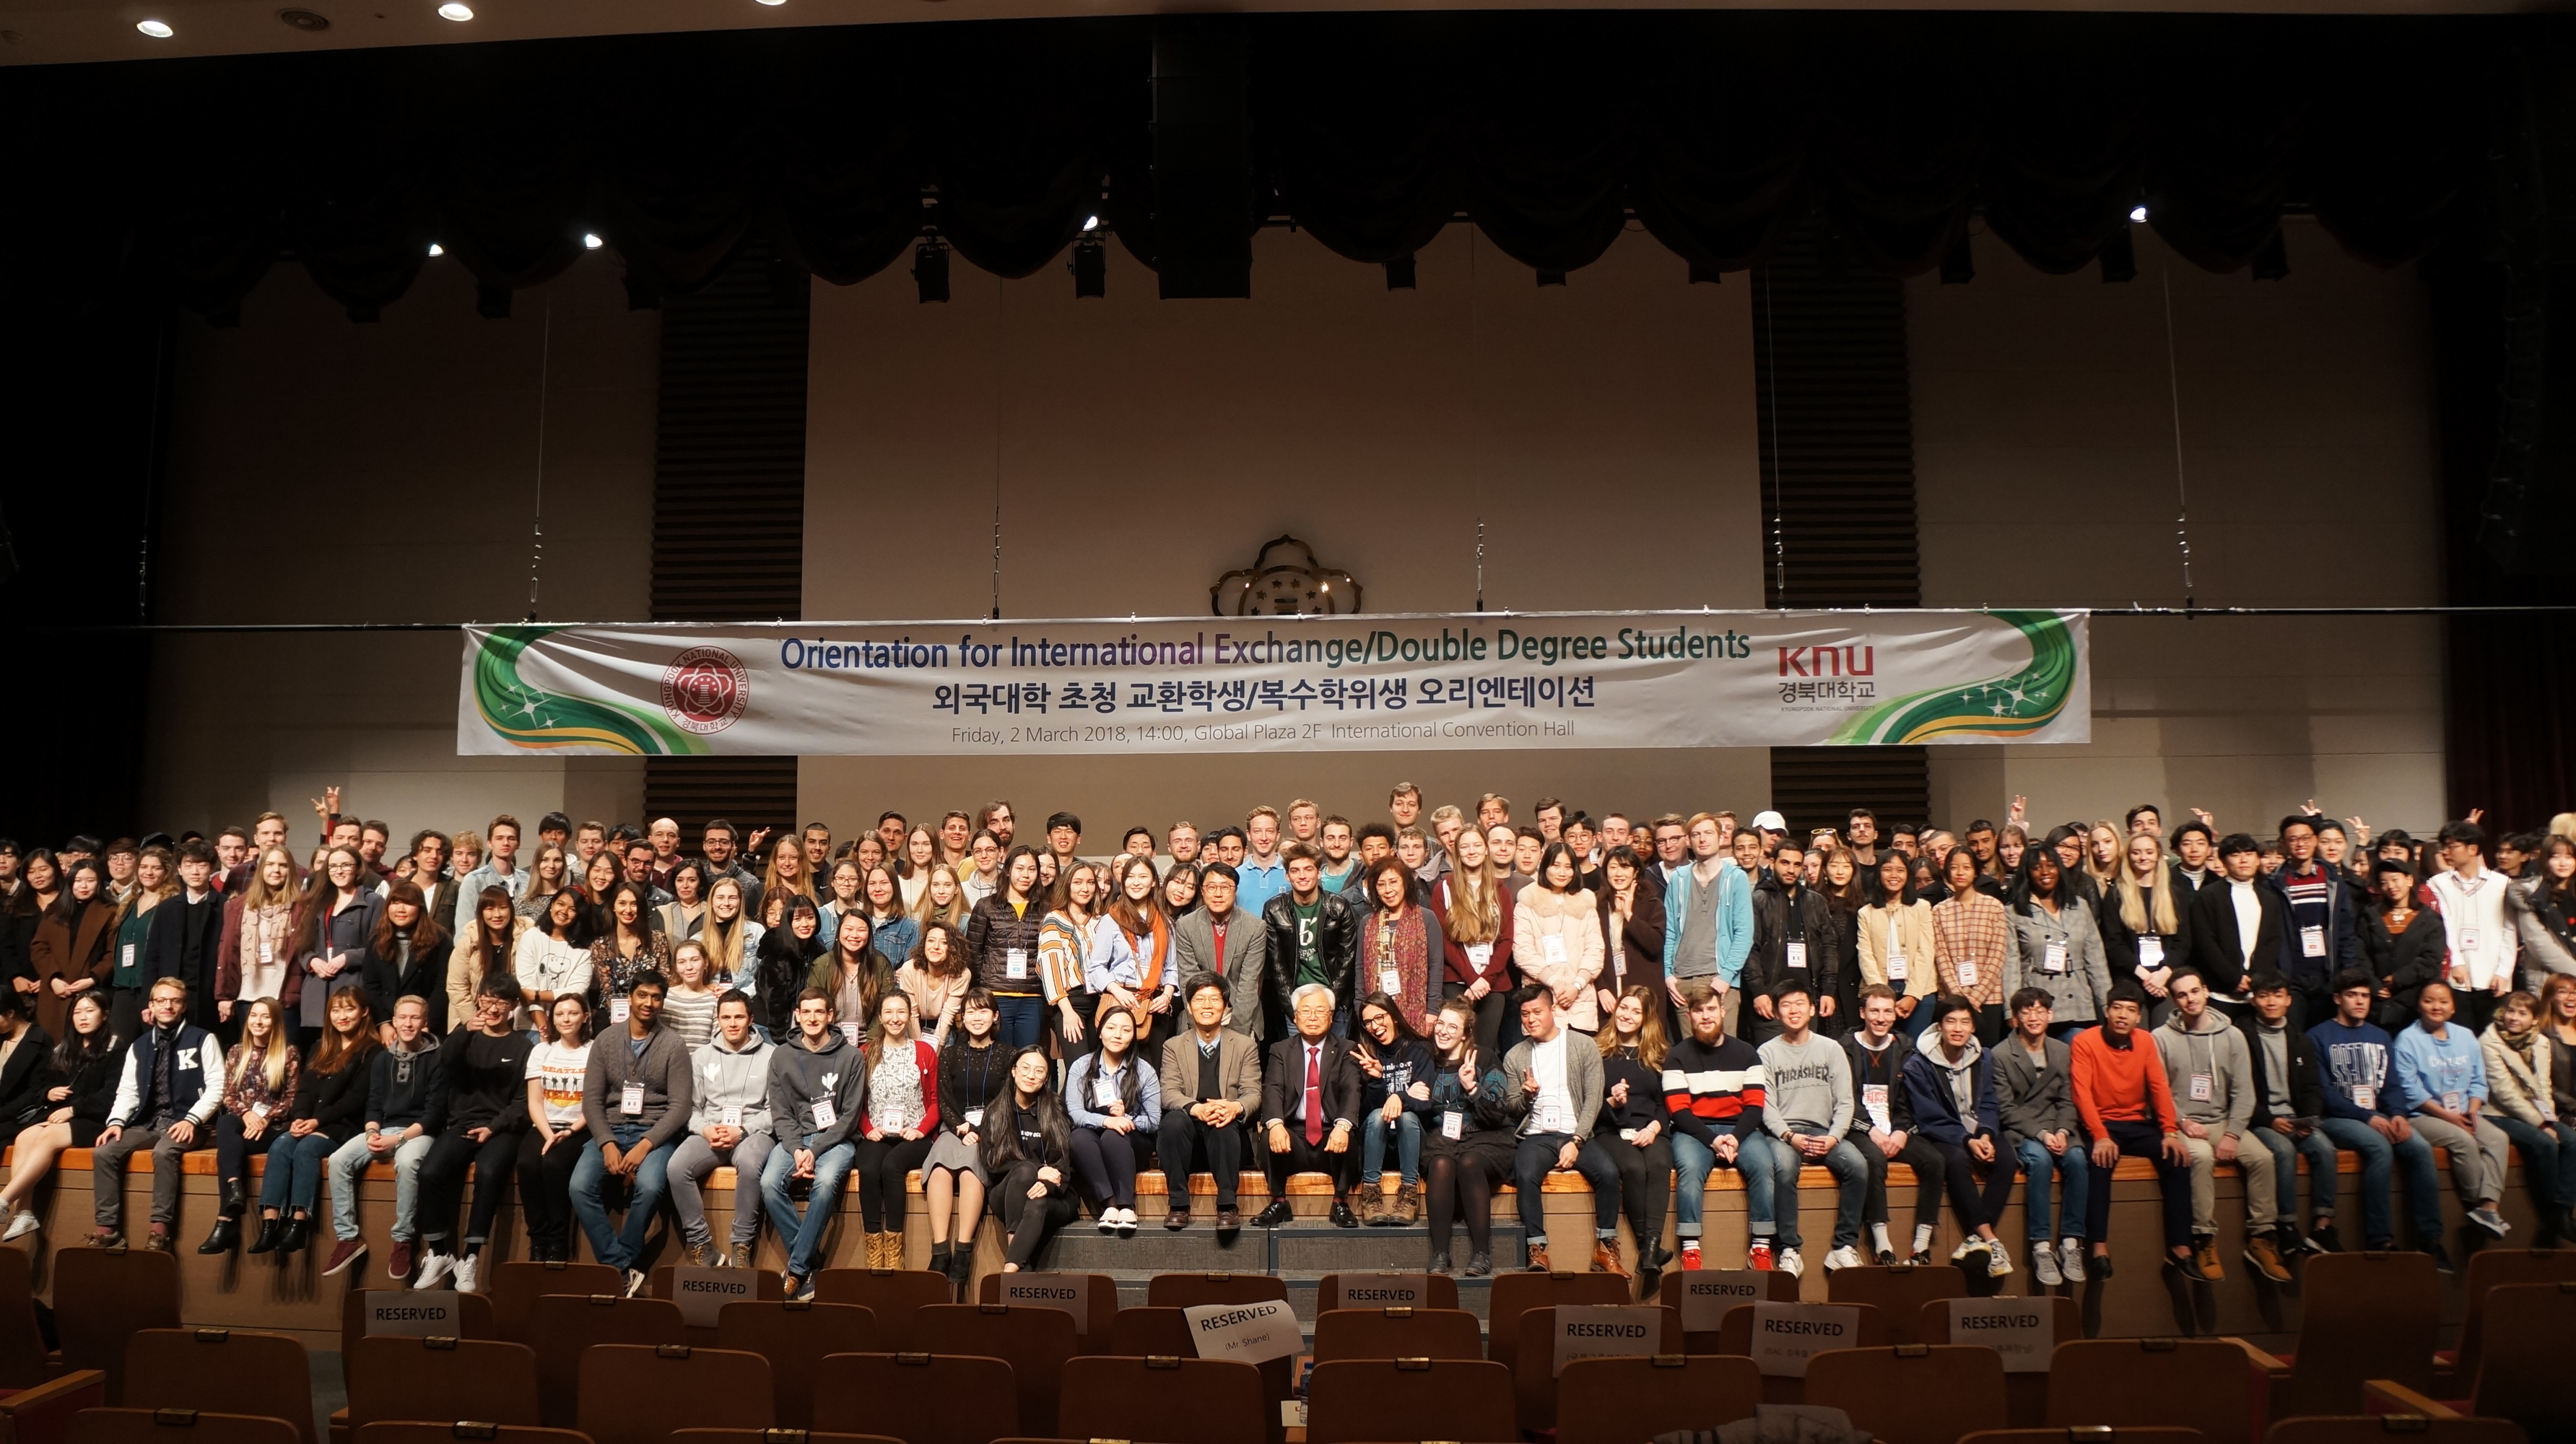 2018 Spring Semester Orientation for International Exchange/Double Degree Students 관련 이미지입니다